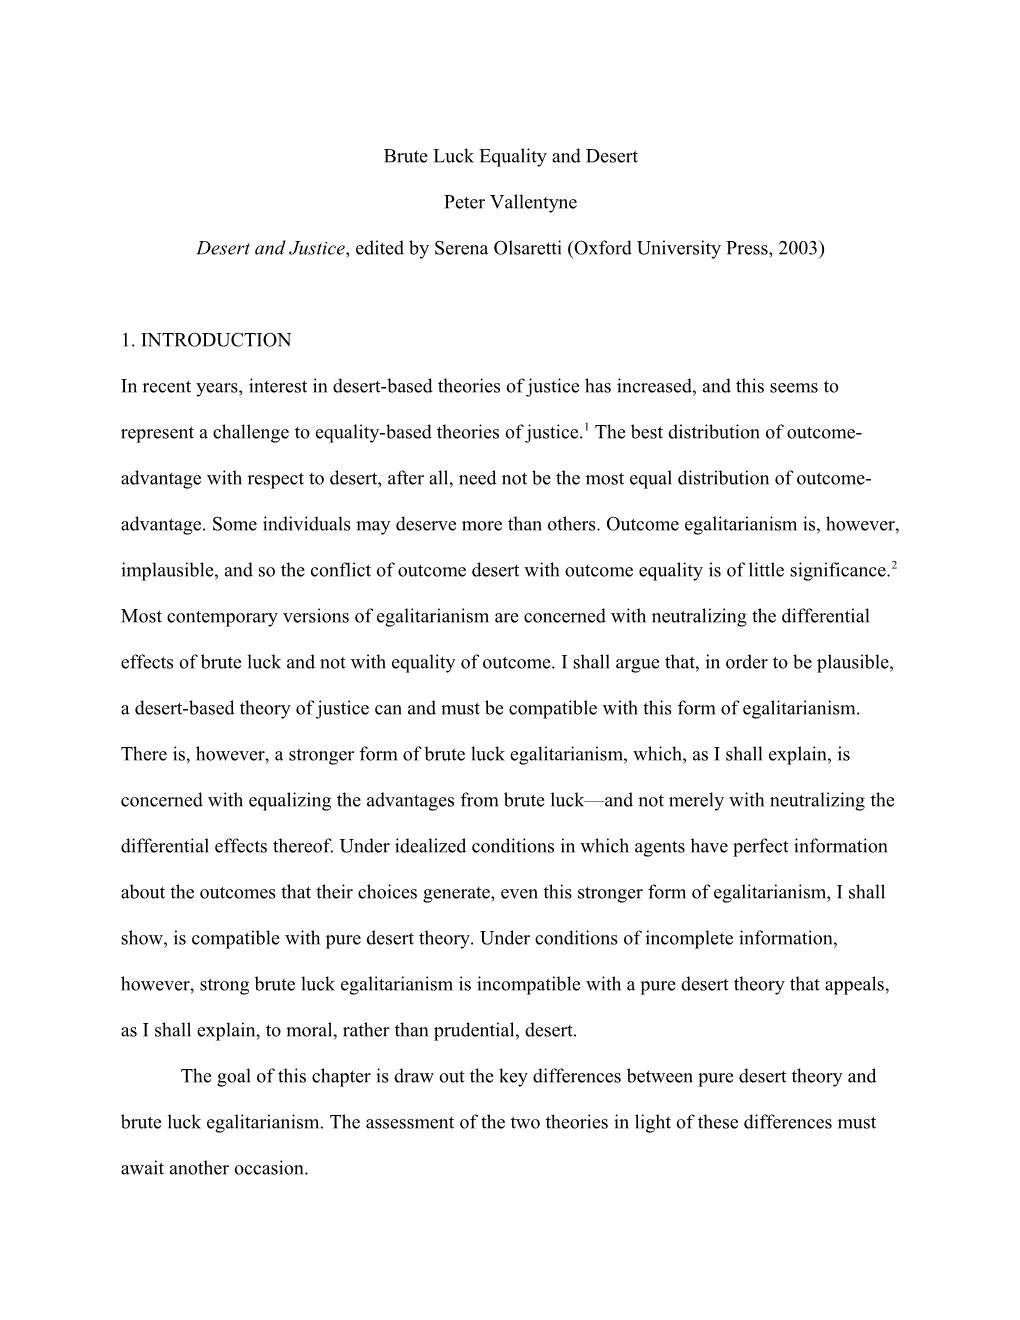 Desert and Equality Paper